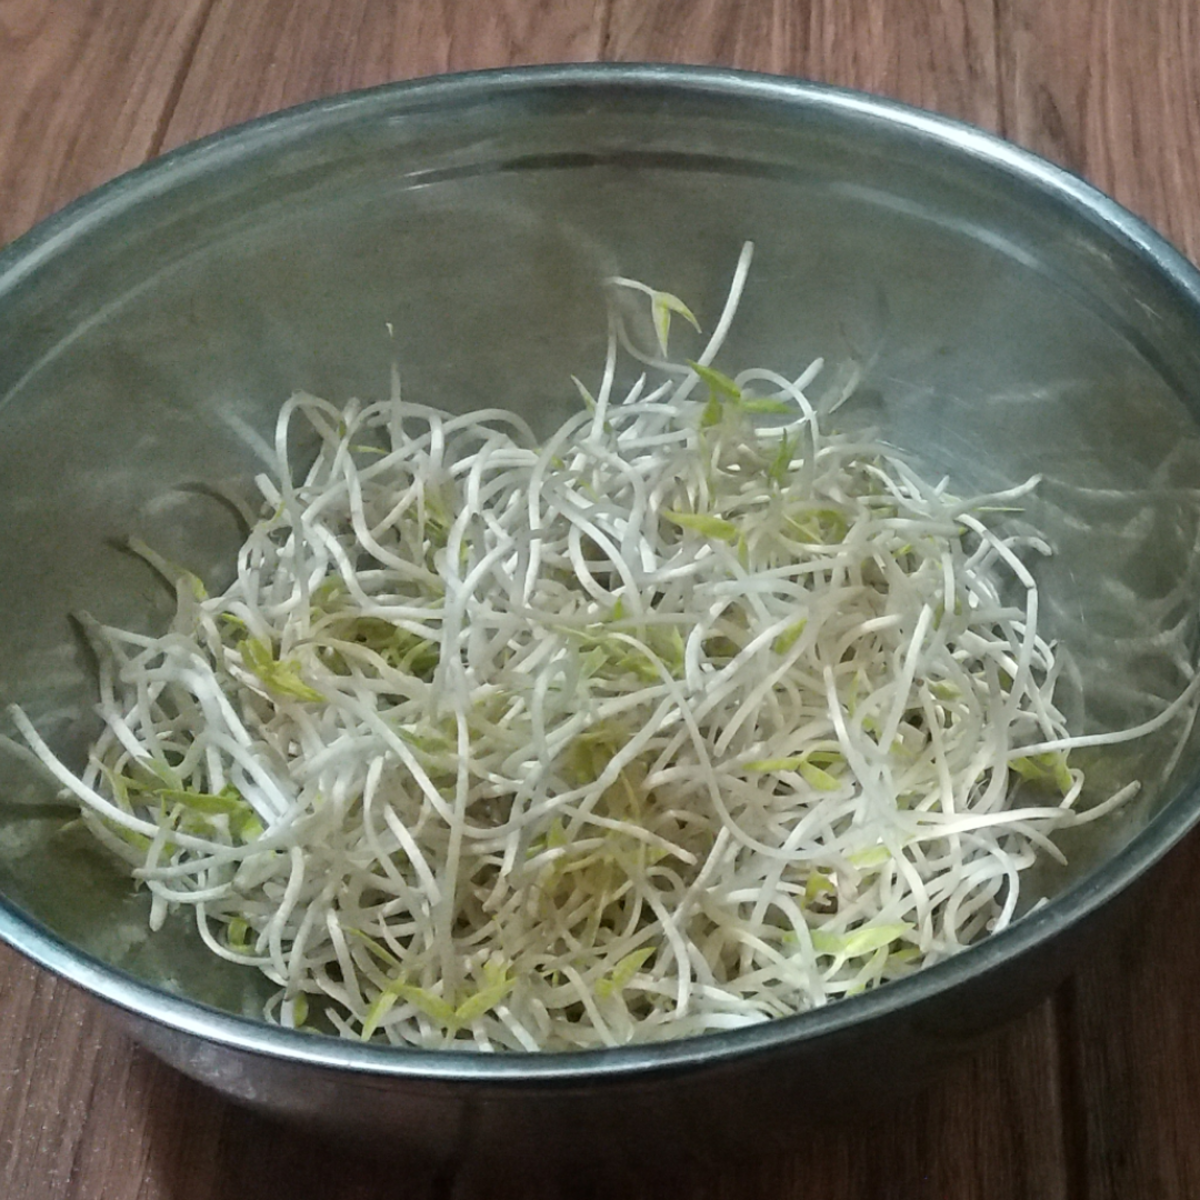 How to eat mung bean sprouts.